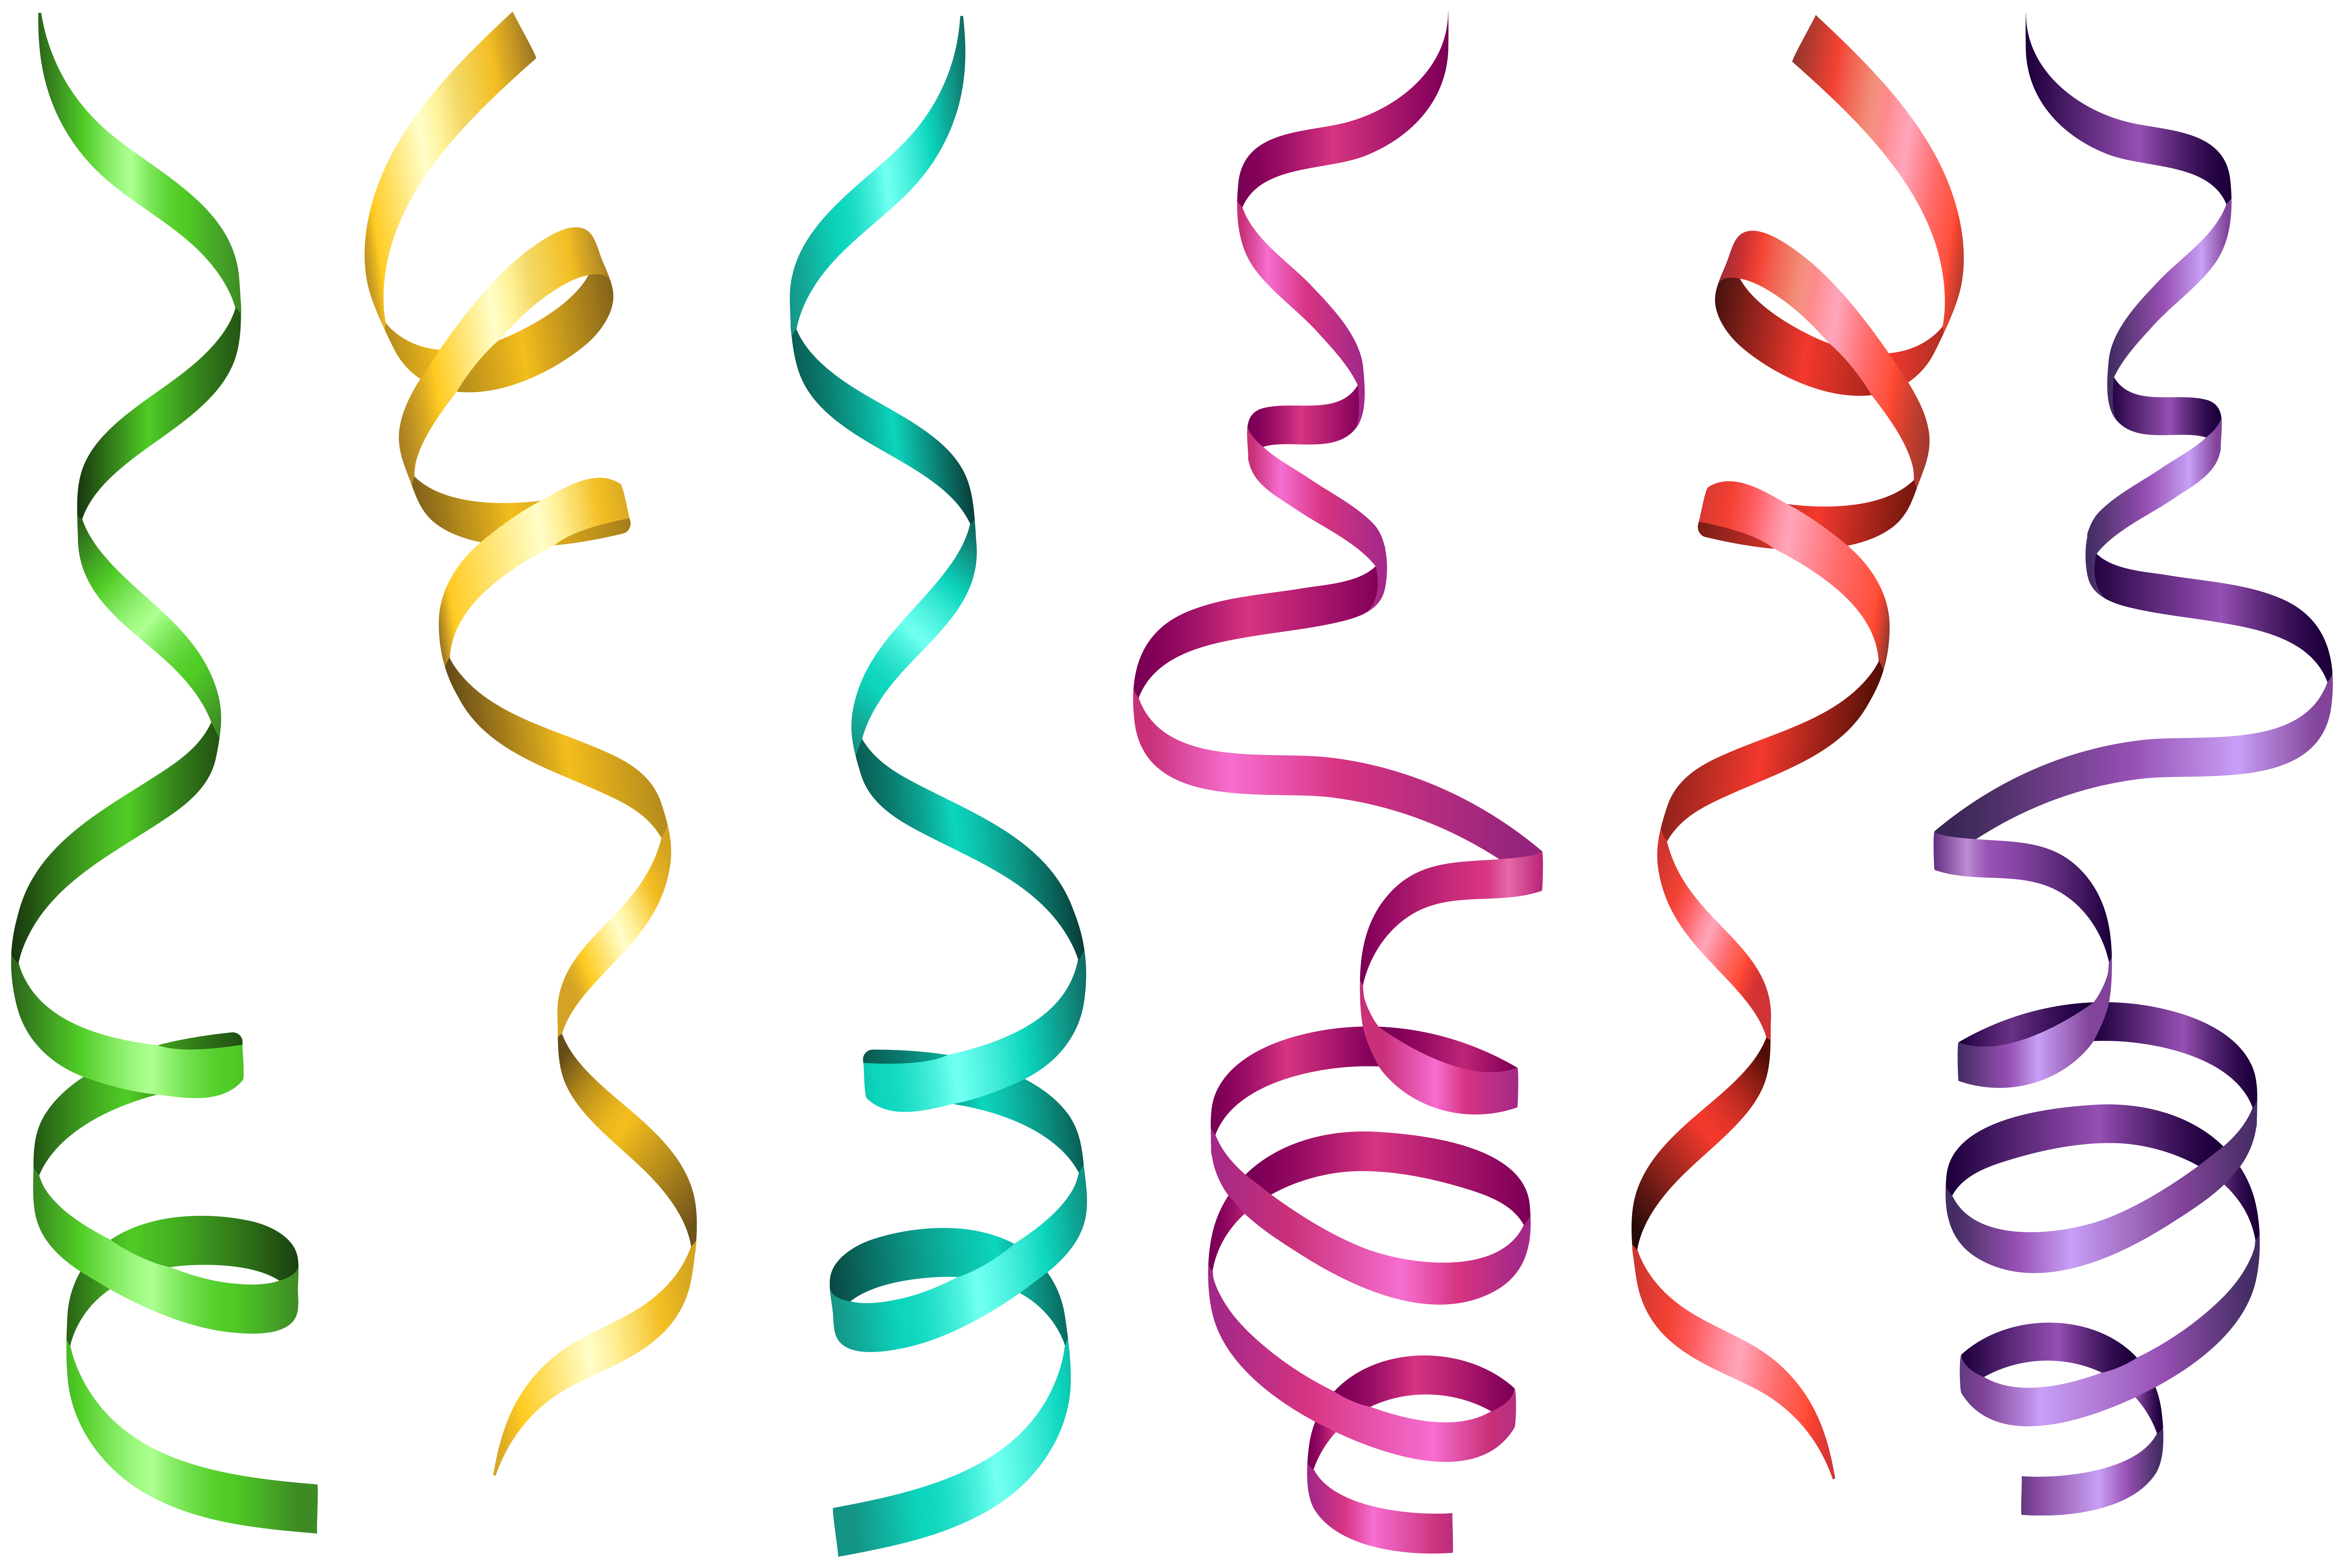 Curly Ribbons Clip Art Image.